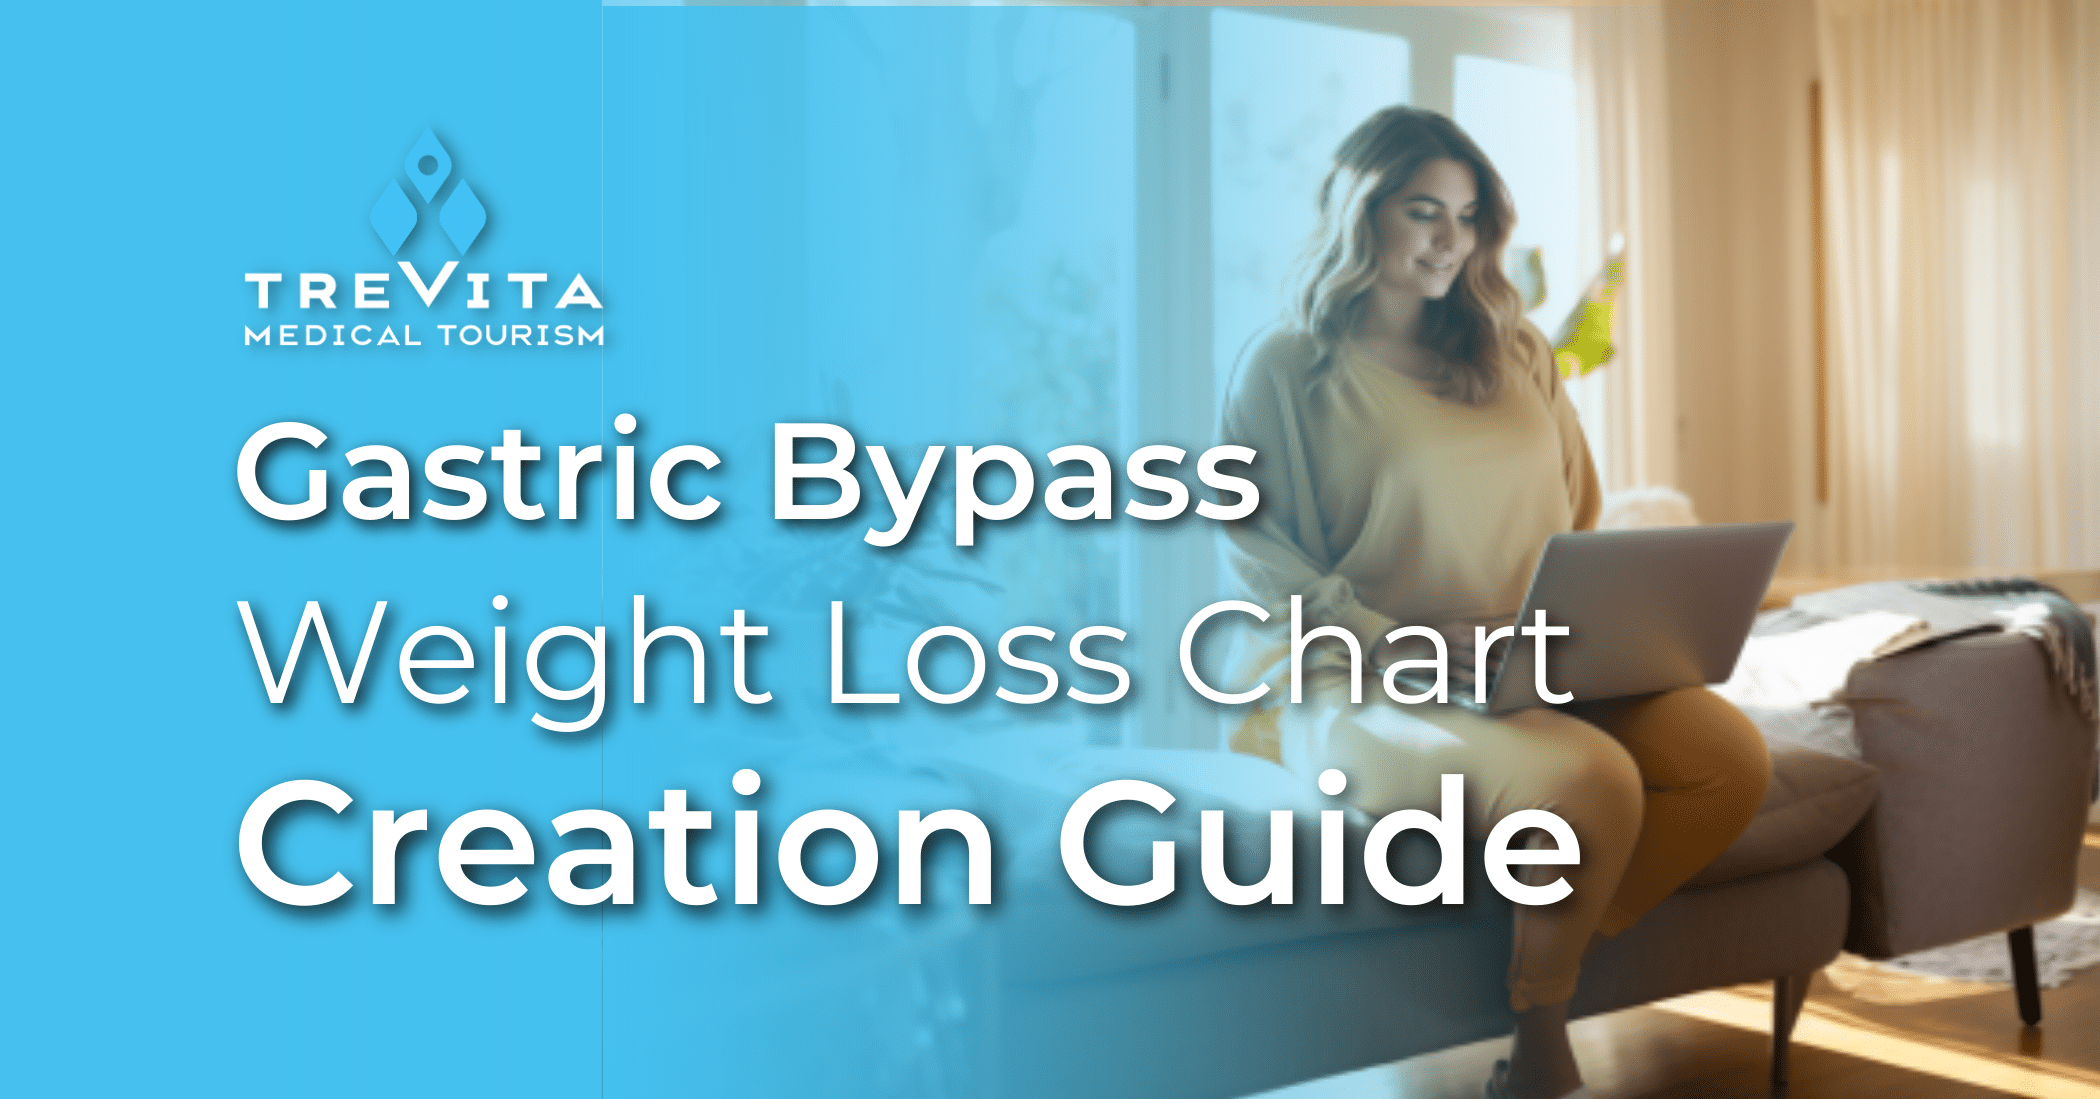 A focused woman sitting at a table with her laptop open, diligently creating her customized gastric bypass weight loss chart to track her progress, stay on track with goals, and celebrate her journey towards a healthier lifestyle